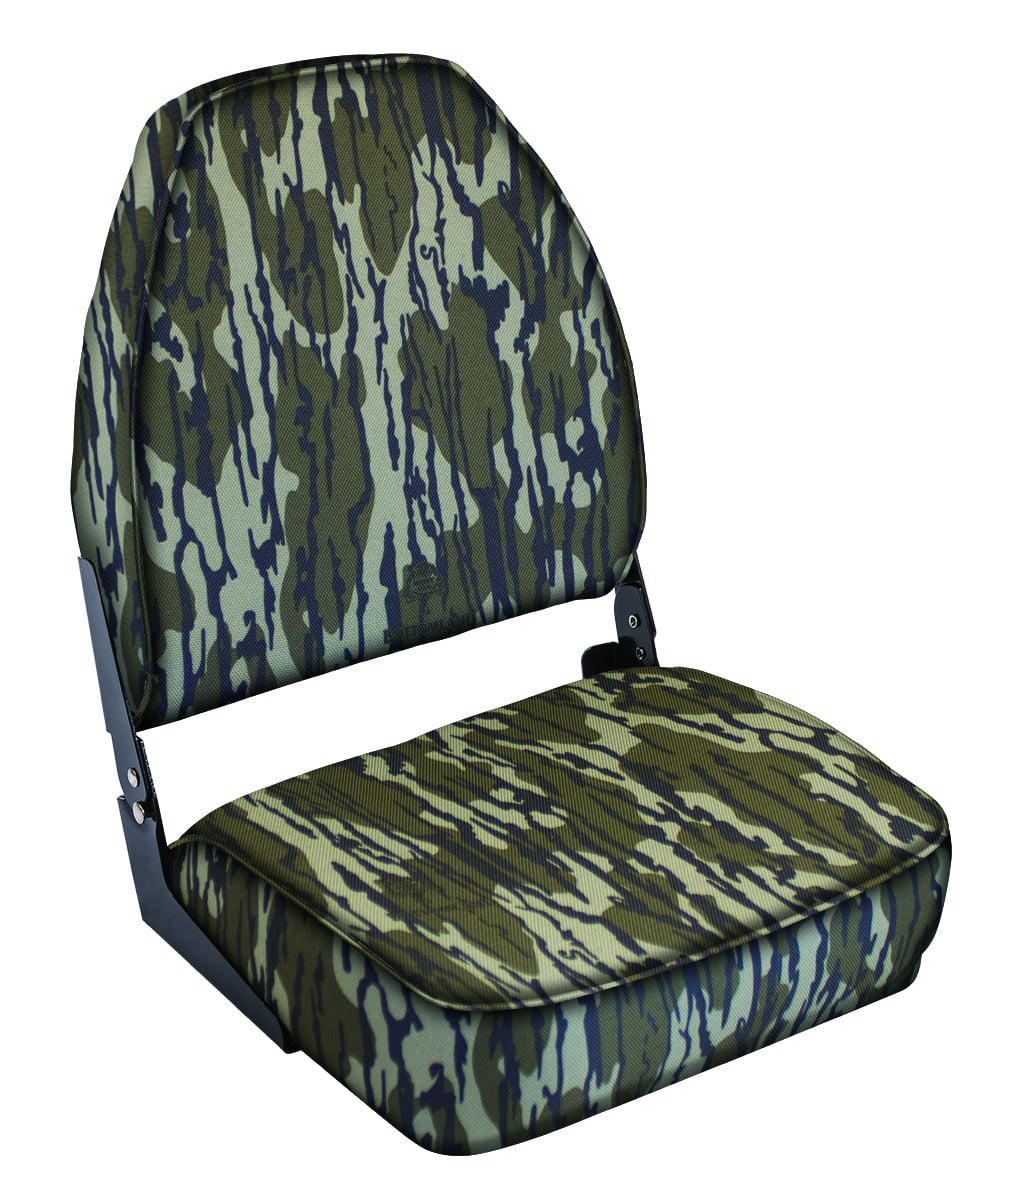 Wise 8WD617PLS-733 High Back Camo Boat Seat, Realtree Max 5